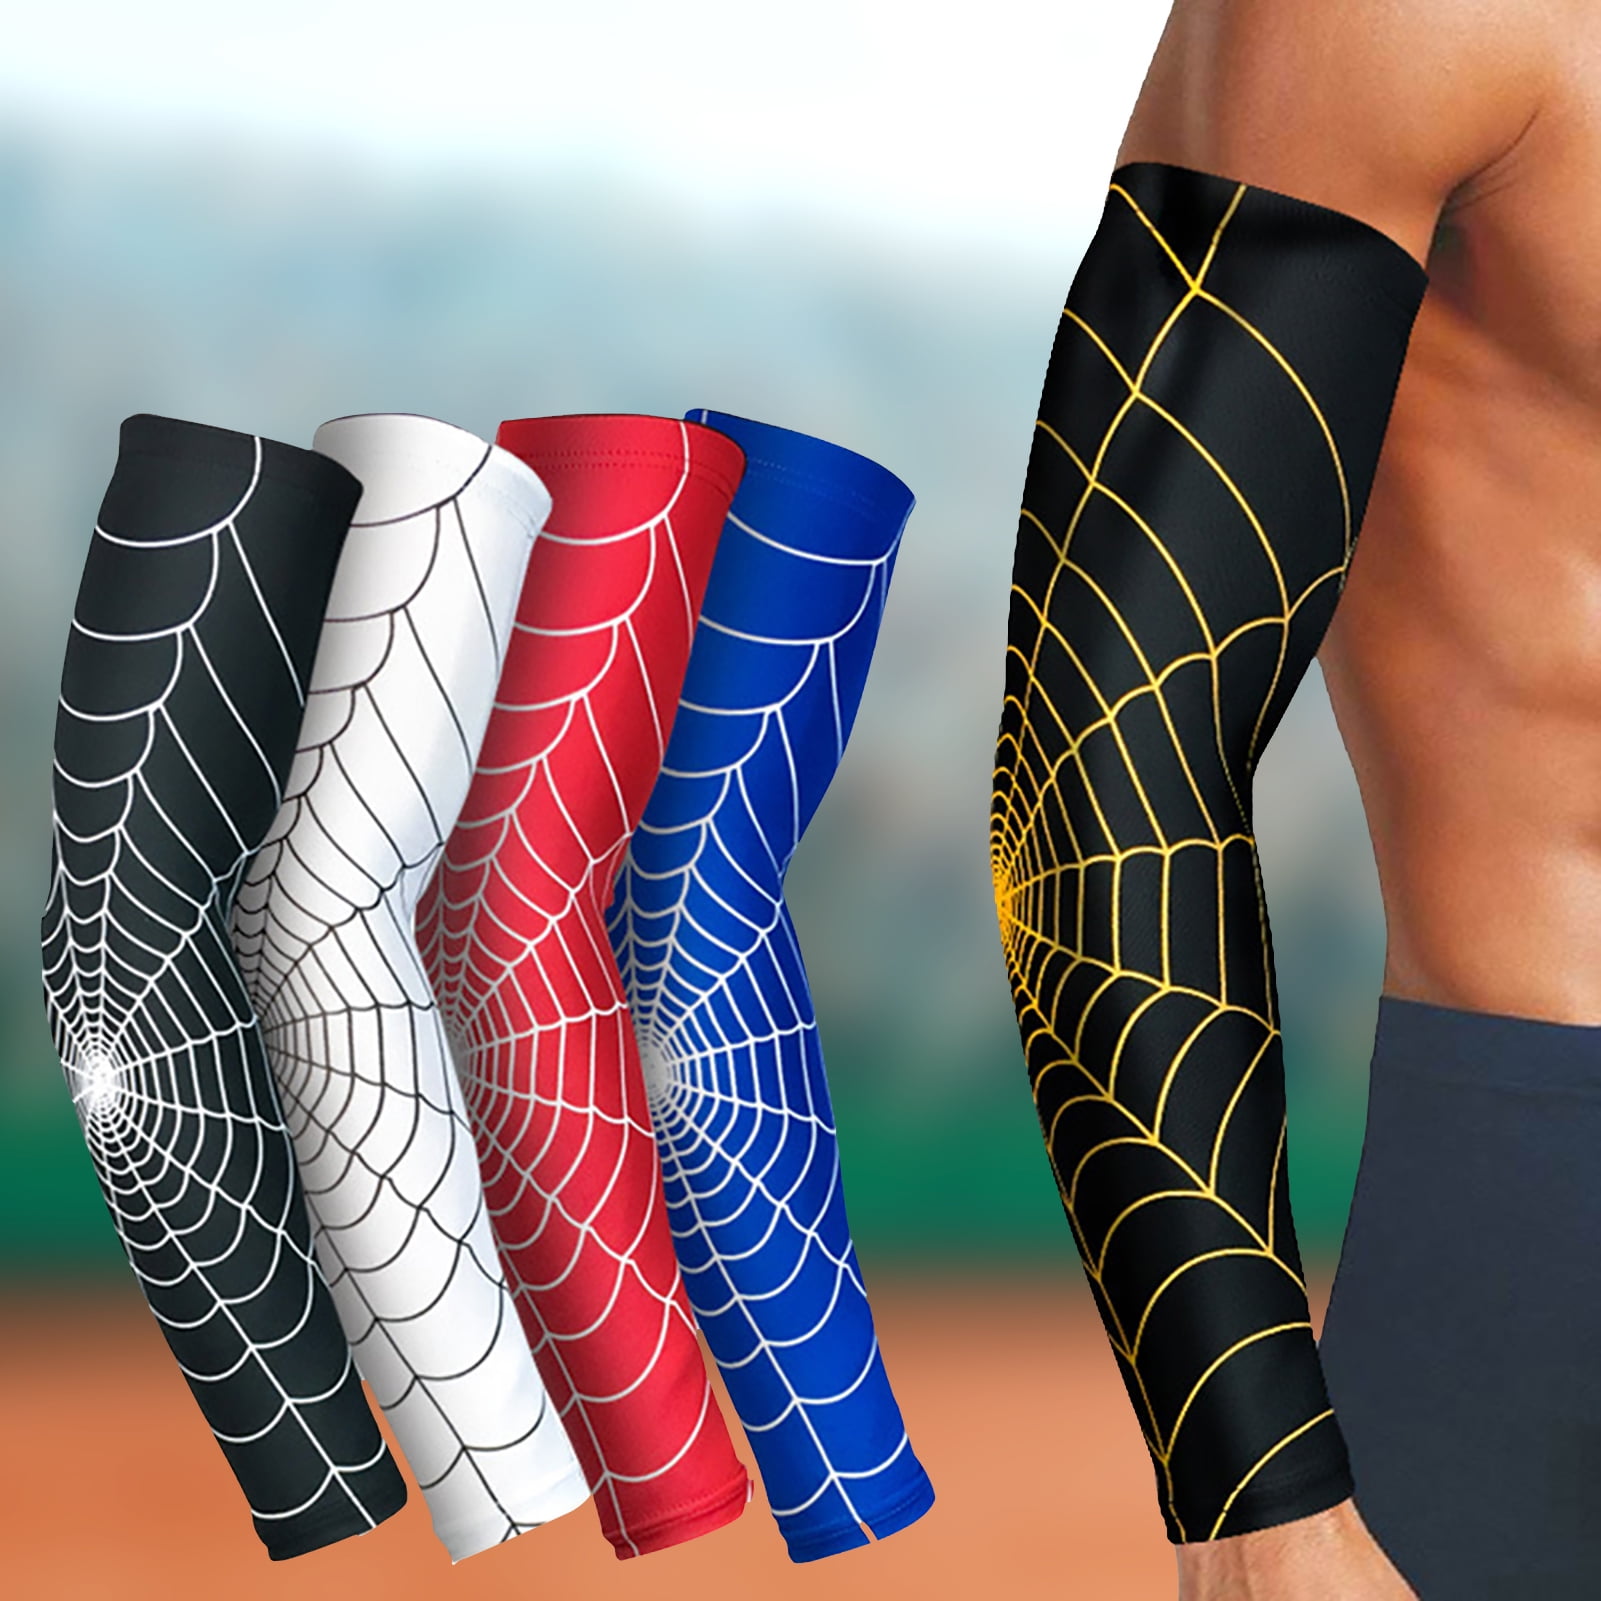 Details about   Sun UV Protection Cooling Arm Sleeves Sports Basketball Cycling for Men Women US 